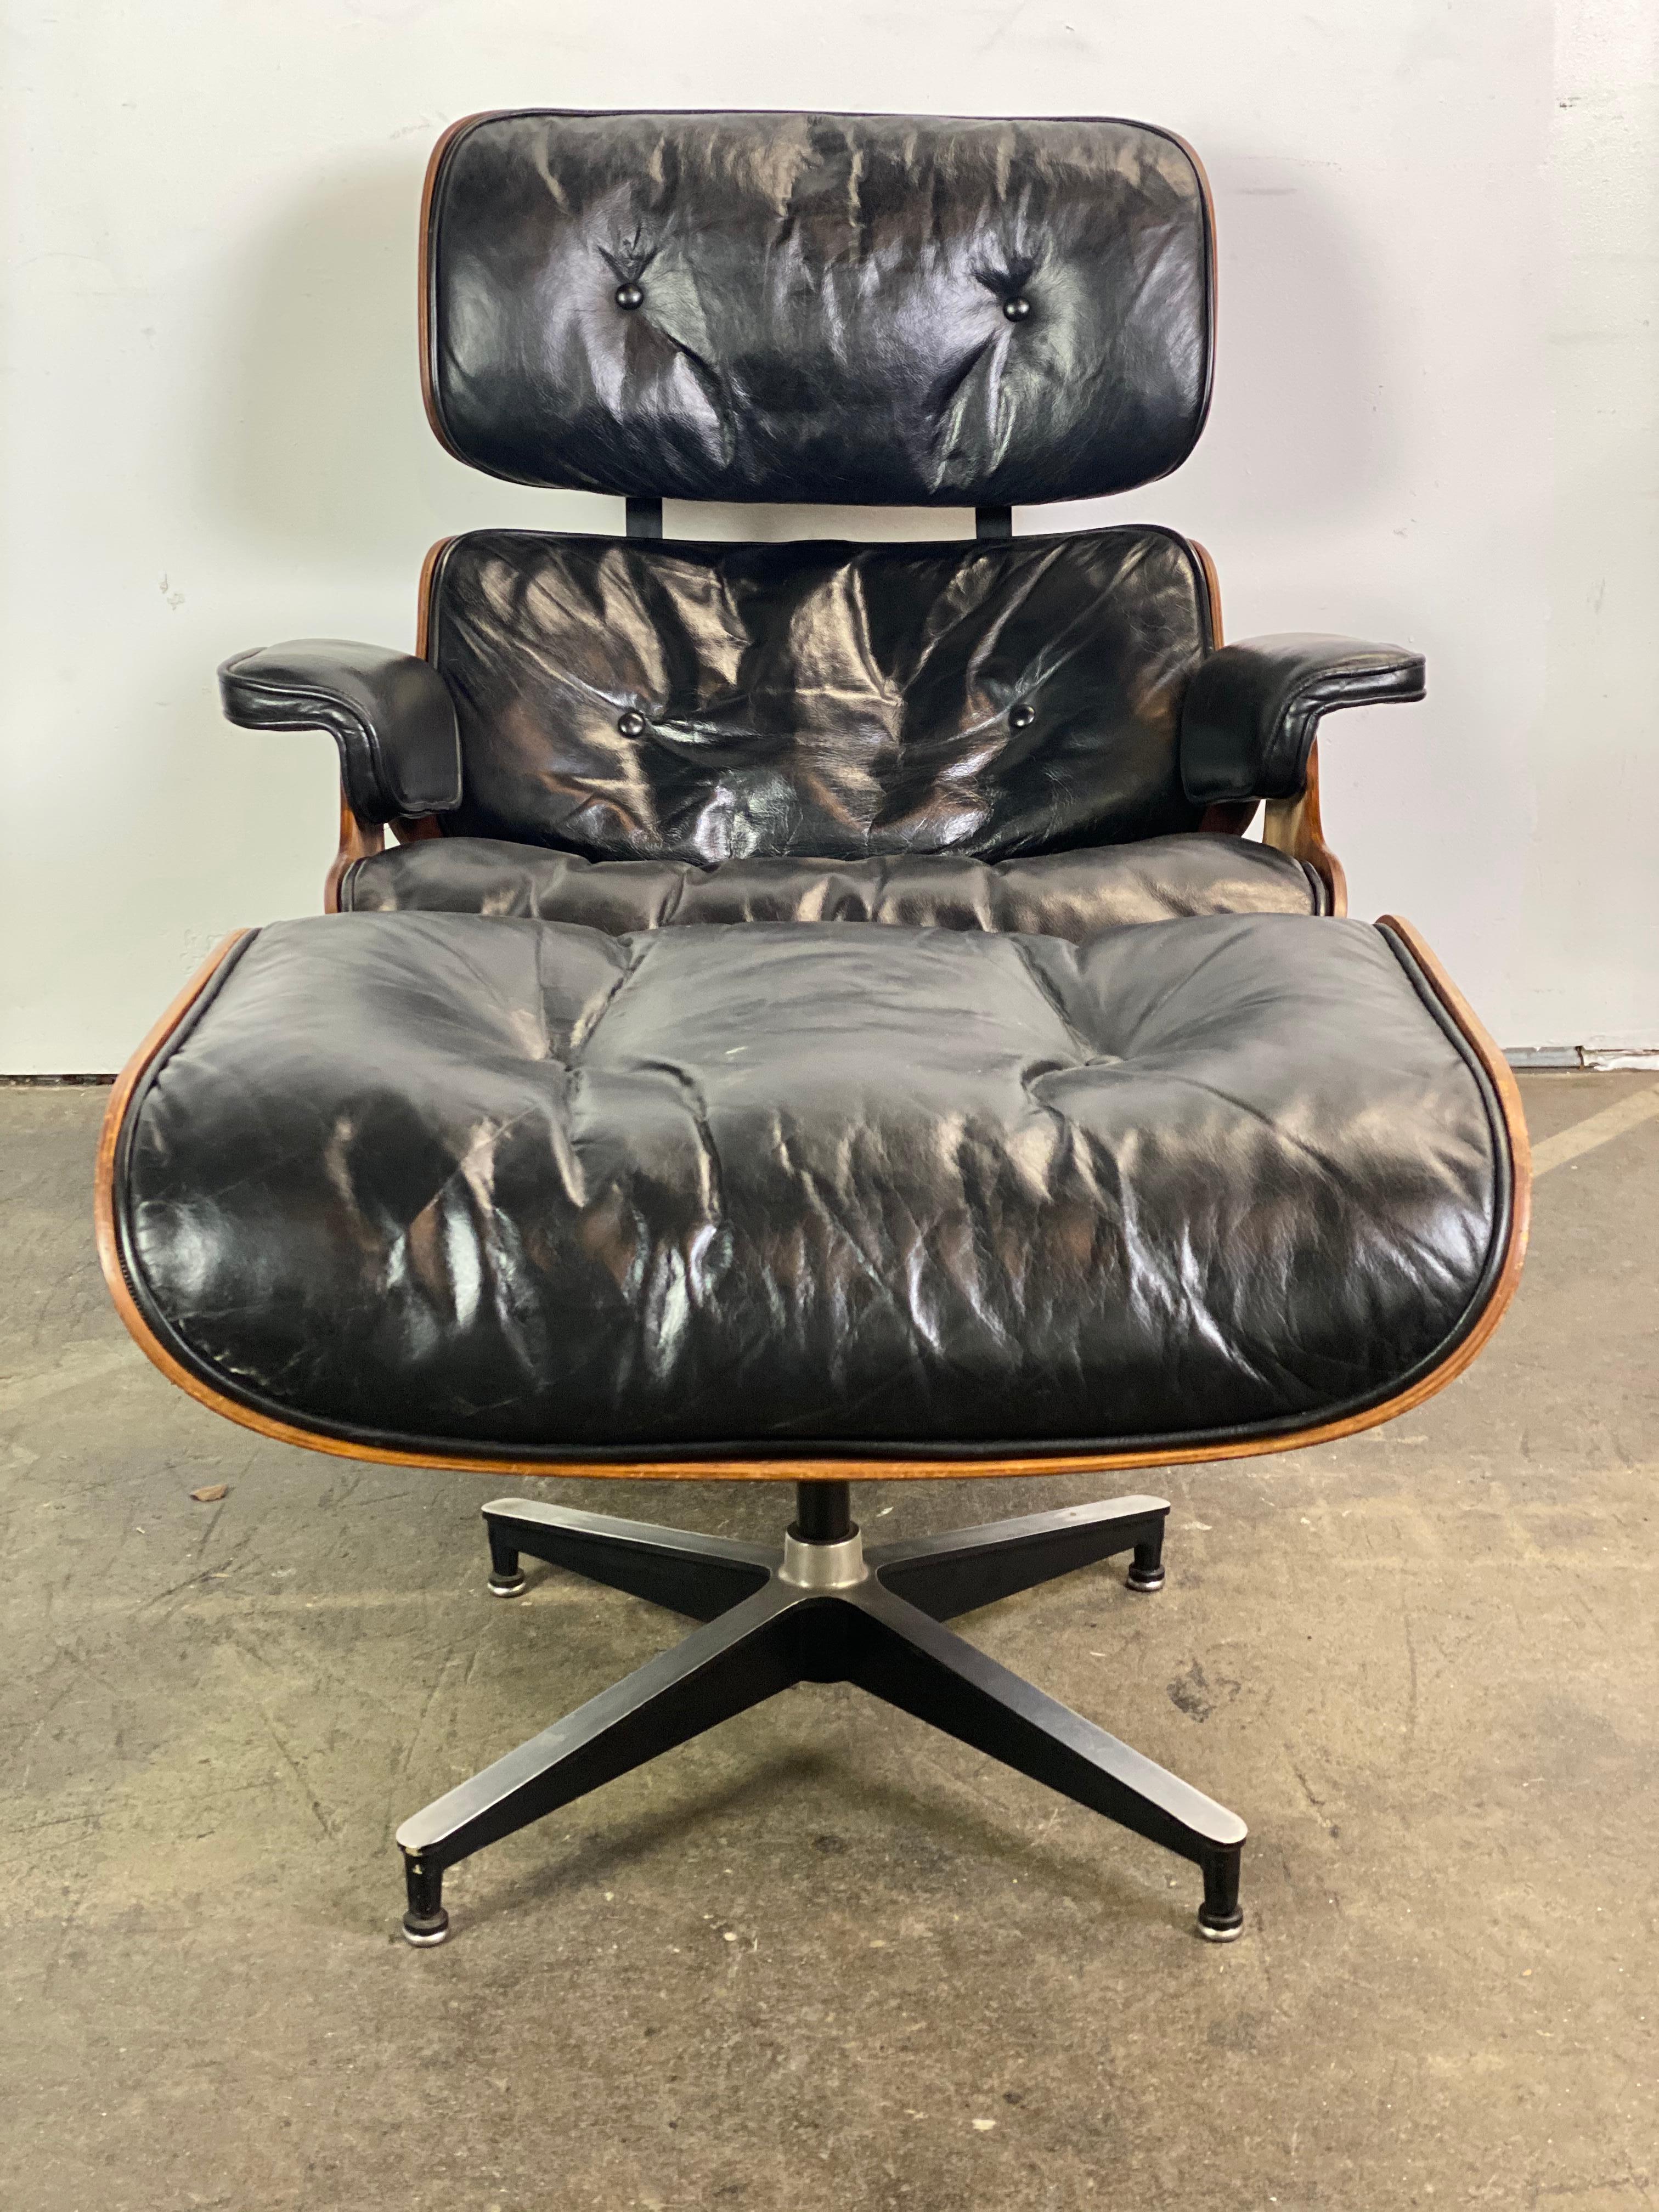 Gorgeous Classic Eames lounge chair and ottoman. Executed in. Brazilian rosewood and original black leather. Replaced seat shock mounts ($500 value). Signed and guaranteed authentic. Leather cleaned and tuned up, wood professionally refinished. All